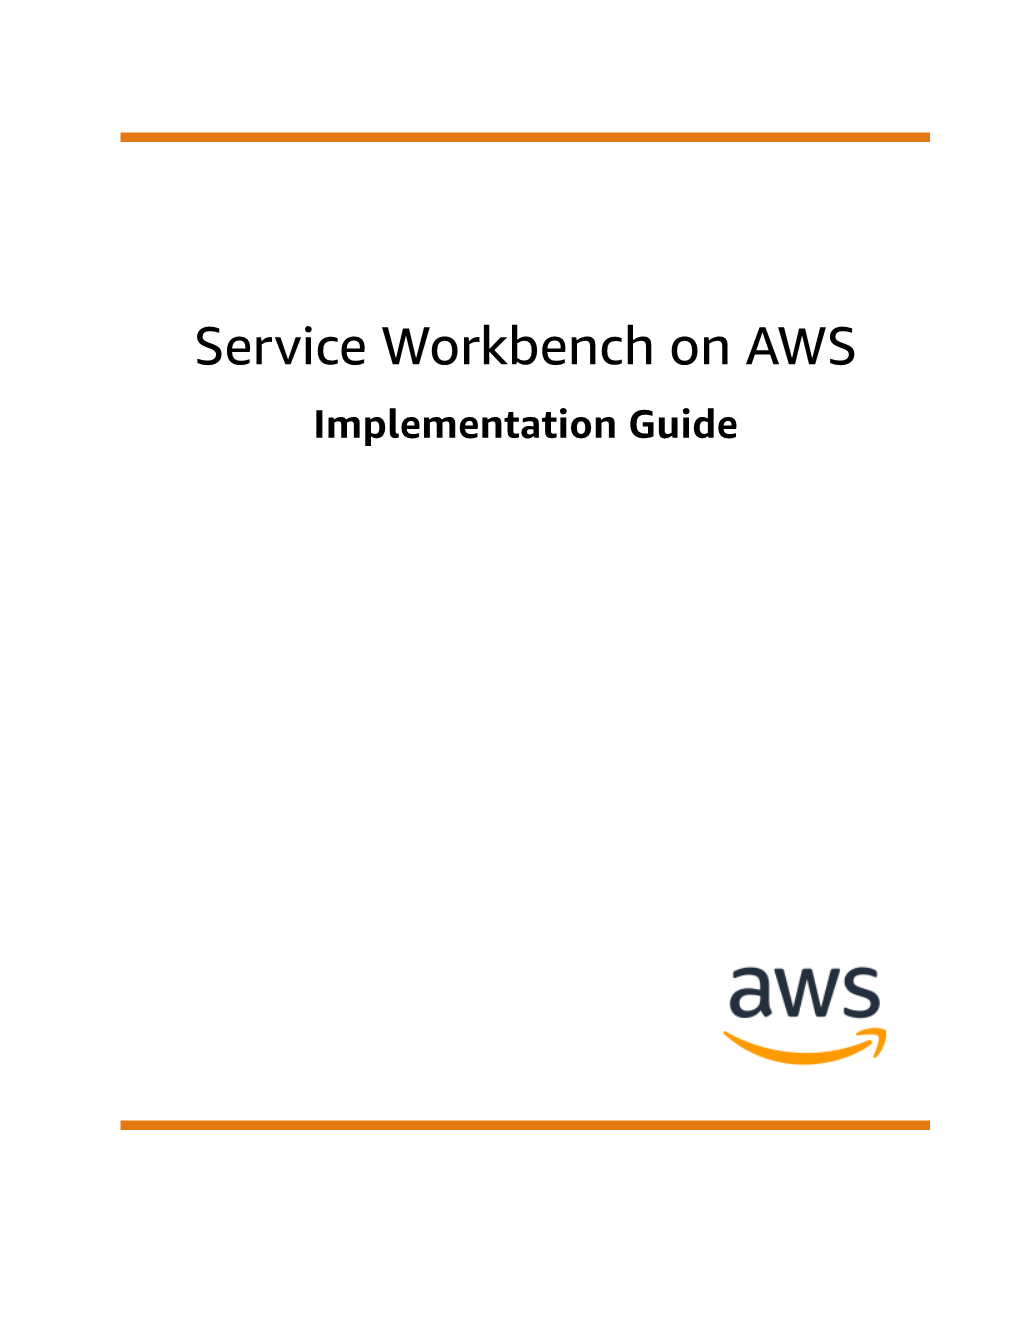 Service Workbench on AWS Implementation Guide Service Workbench on AWS Implementation Guide